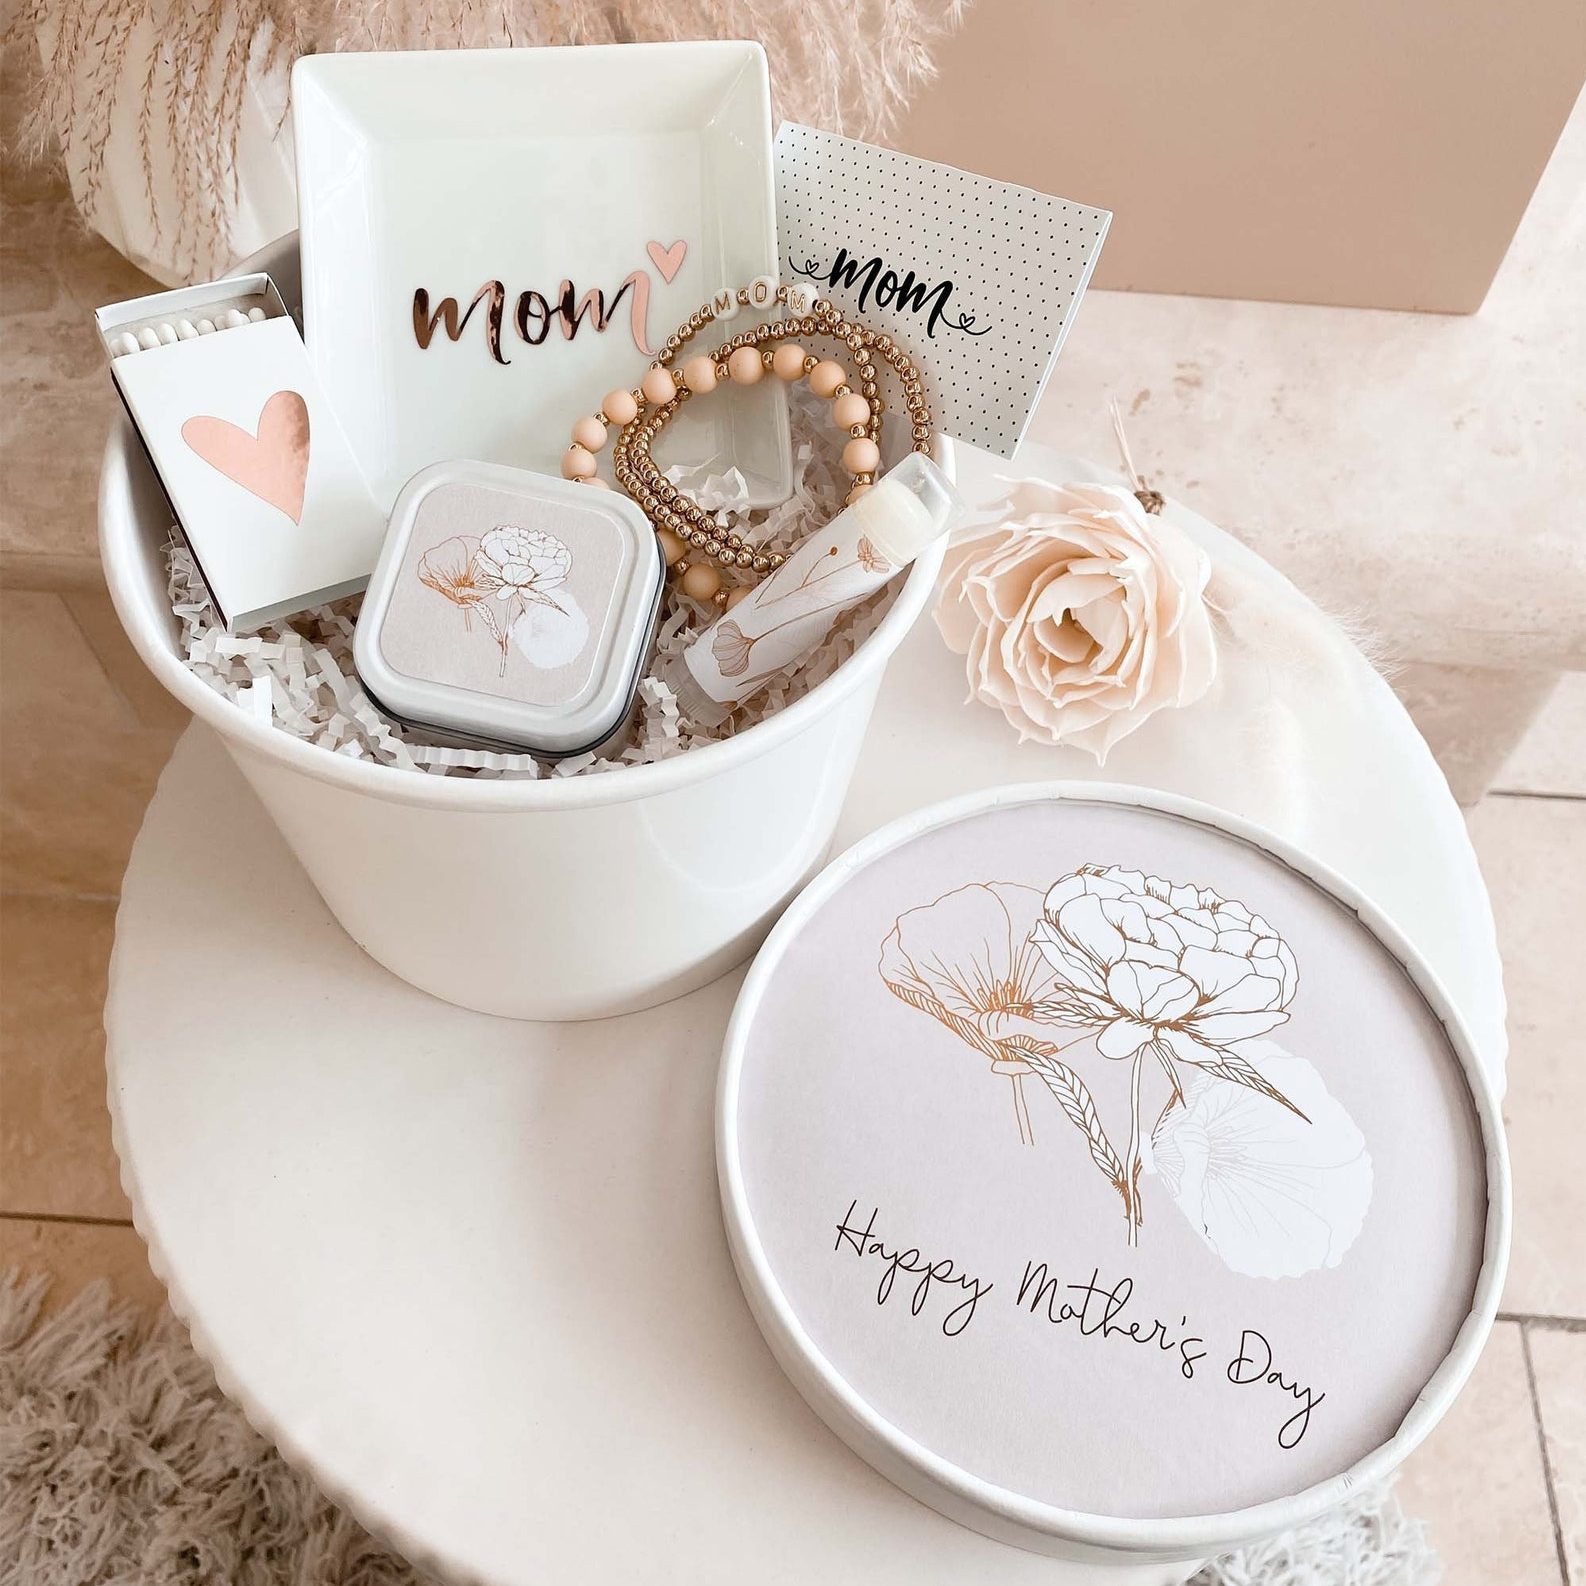  Gifts For Mom - Mom Gifts Tea Set, Gift Basket For Women,  Birthday Gifts For Women, Mom Birthday Gifts or Mothers Day Gifts in  Beautiful Gift Box includes Tea Cup